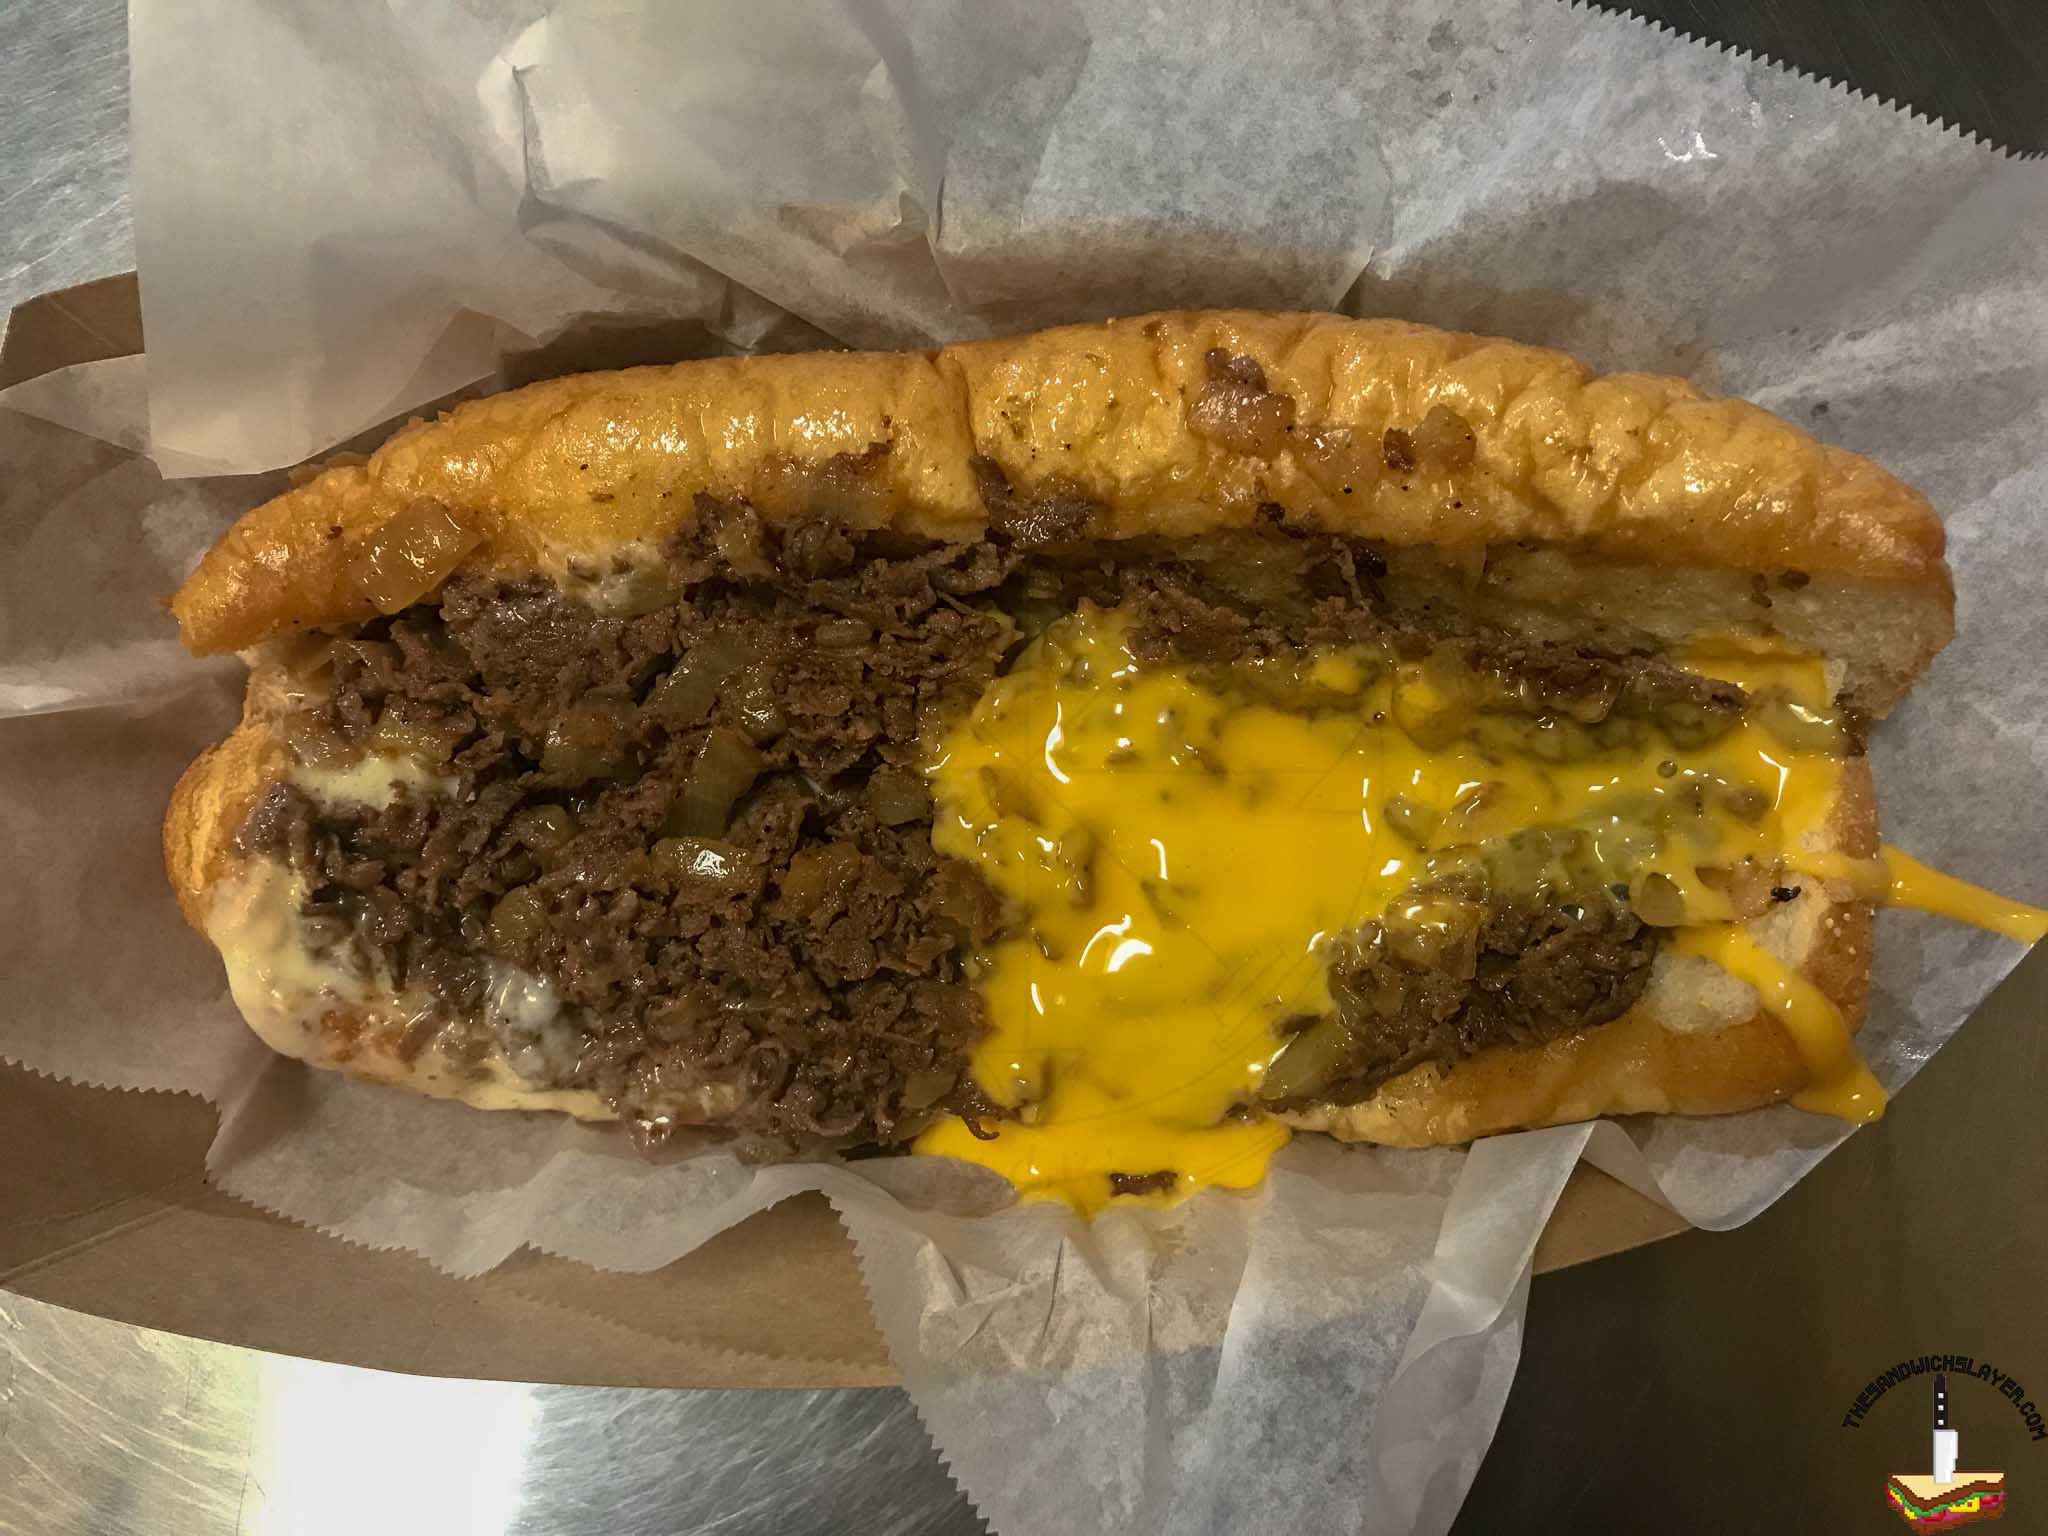 Boo's Philly Cheesesteaks, Los Angeles CA - The Sandwich Slayer